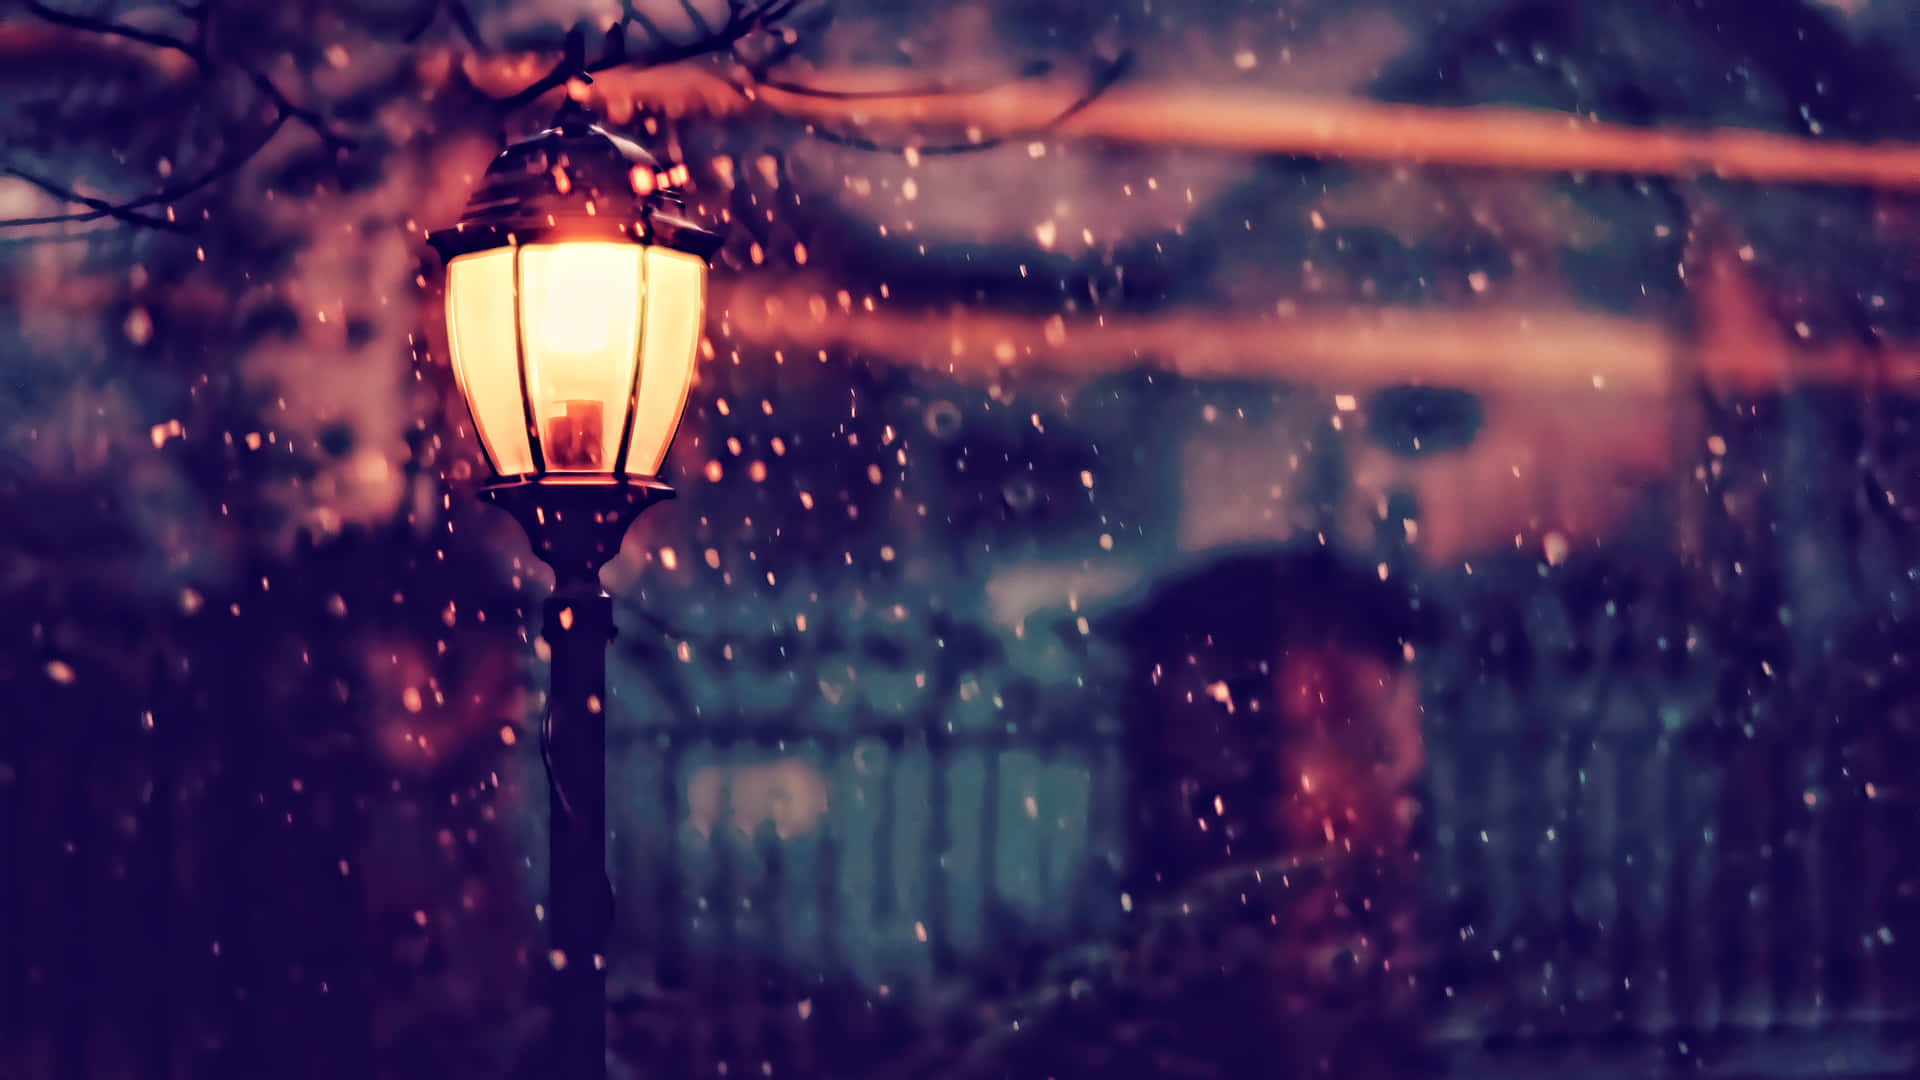 Snowing Yellow Lamp Lighting Picture